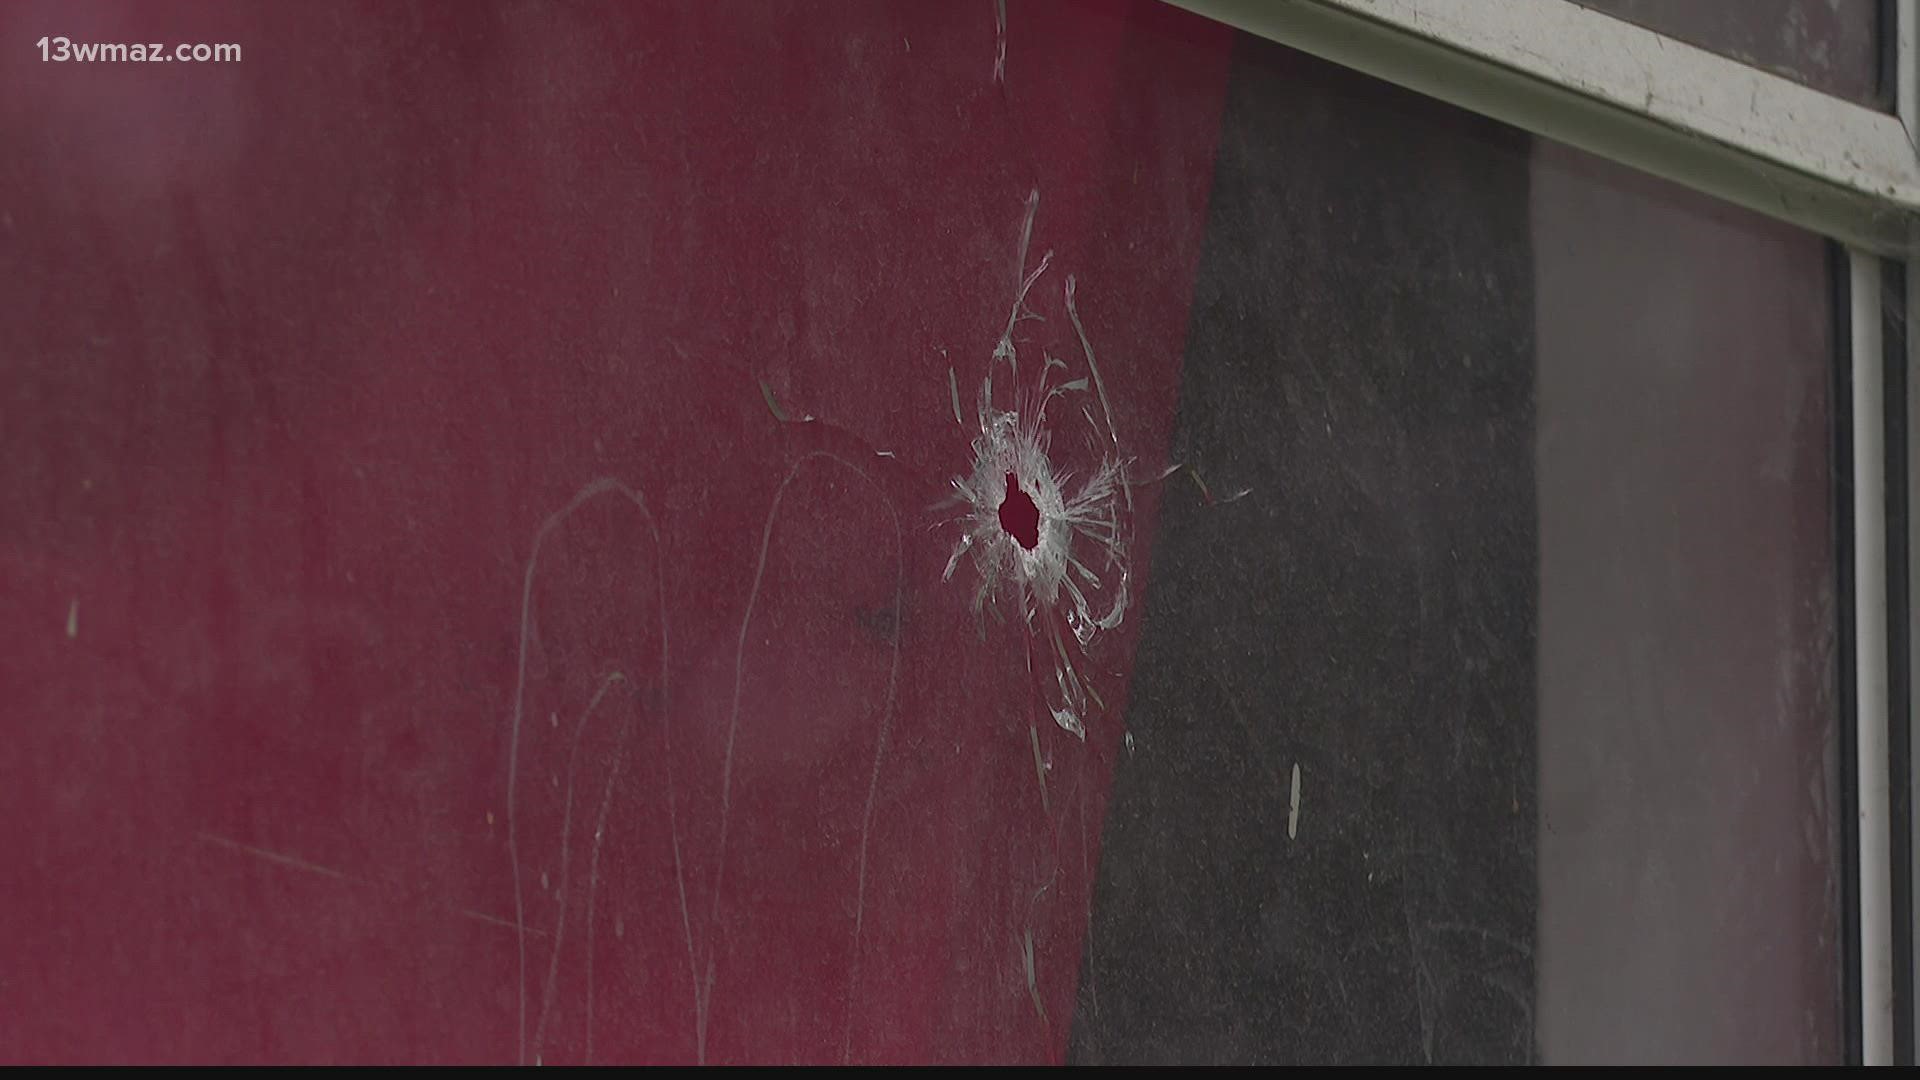 Teagan Jones was about to fall asleep when bullets started flying through her home.